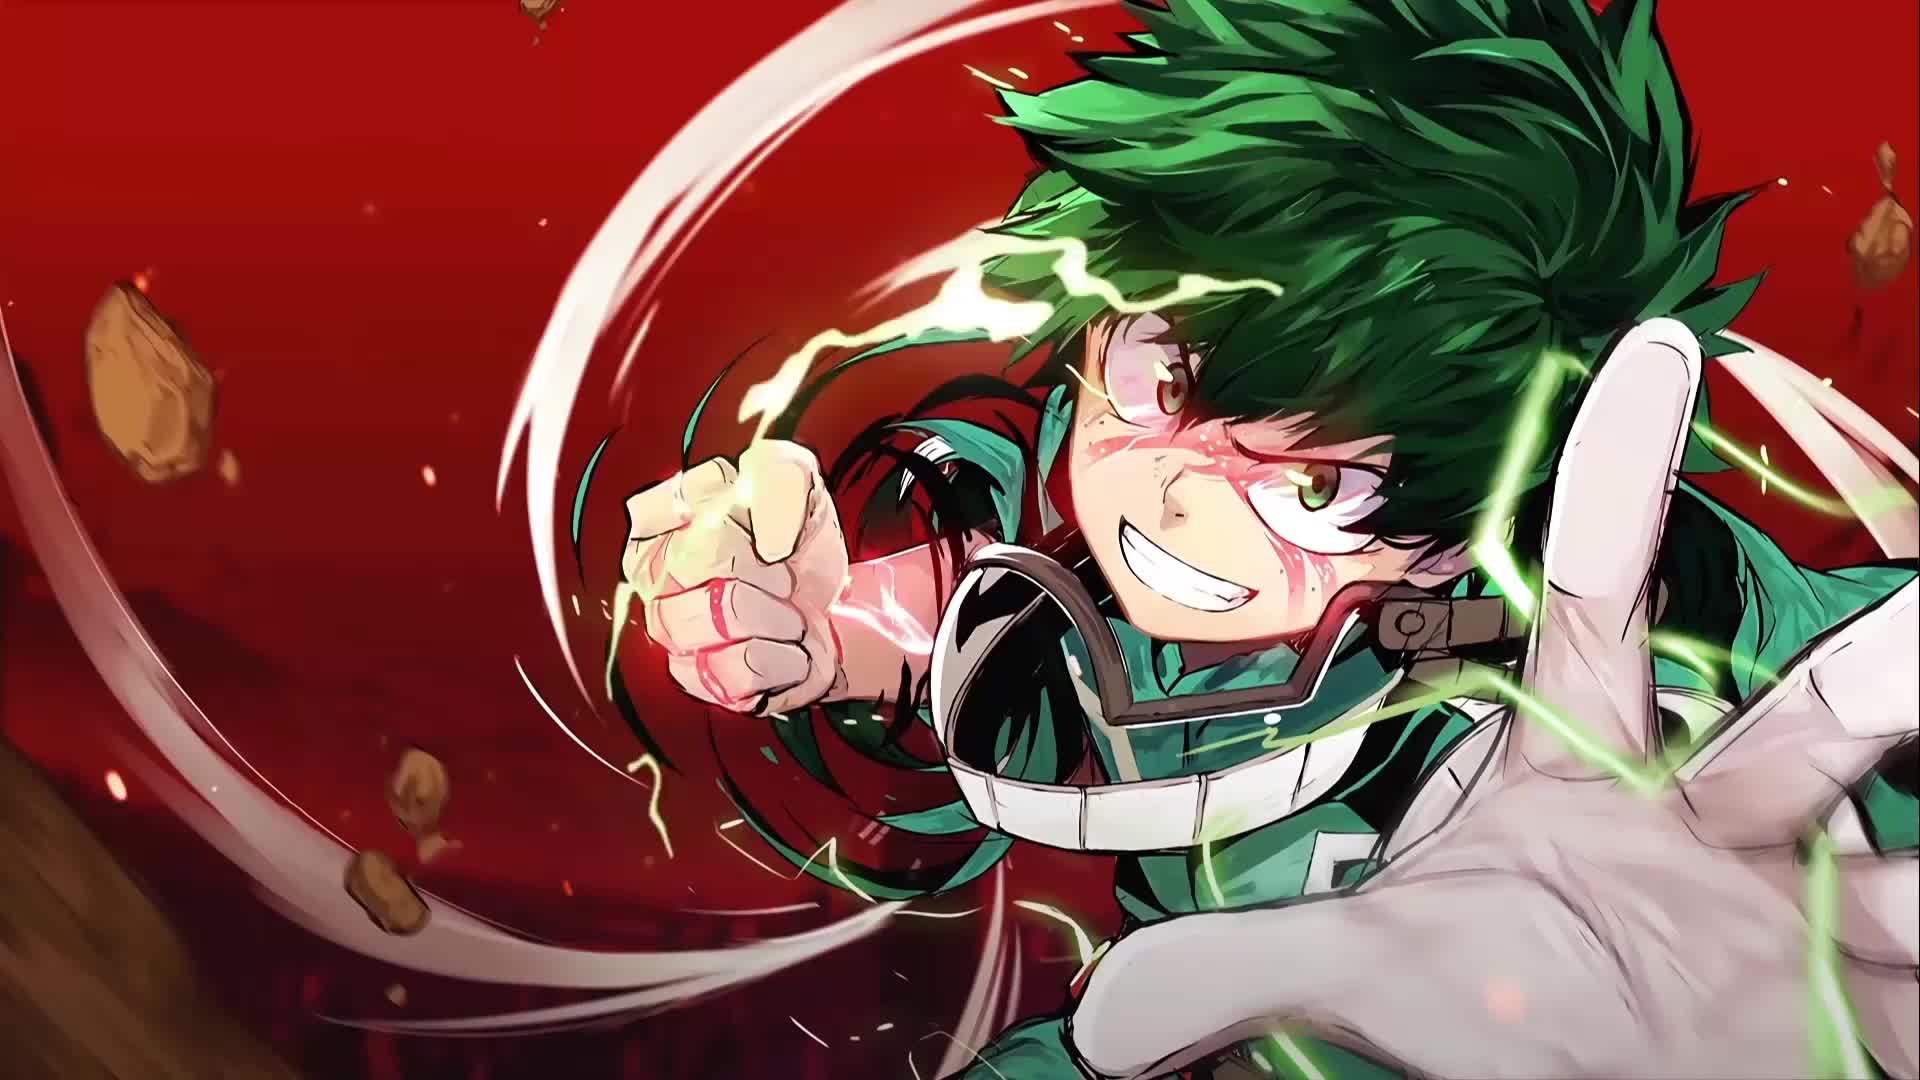 Cool Anime MHA Wallpapers - Wallpaper Cave